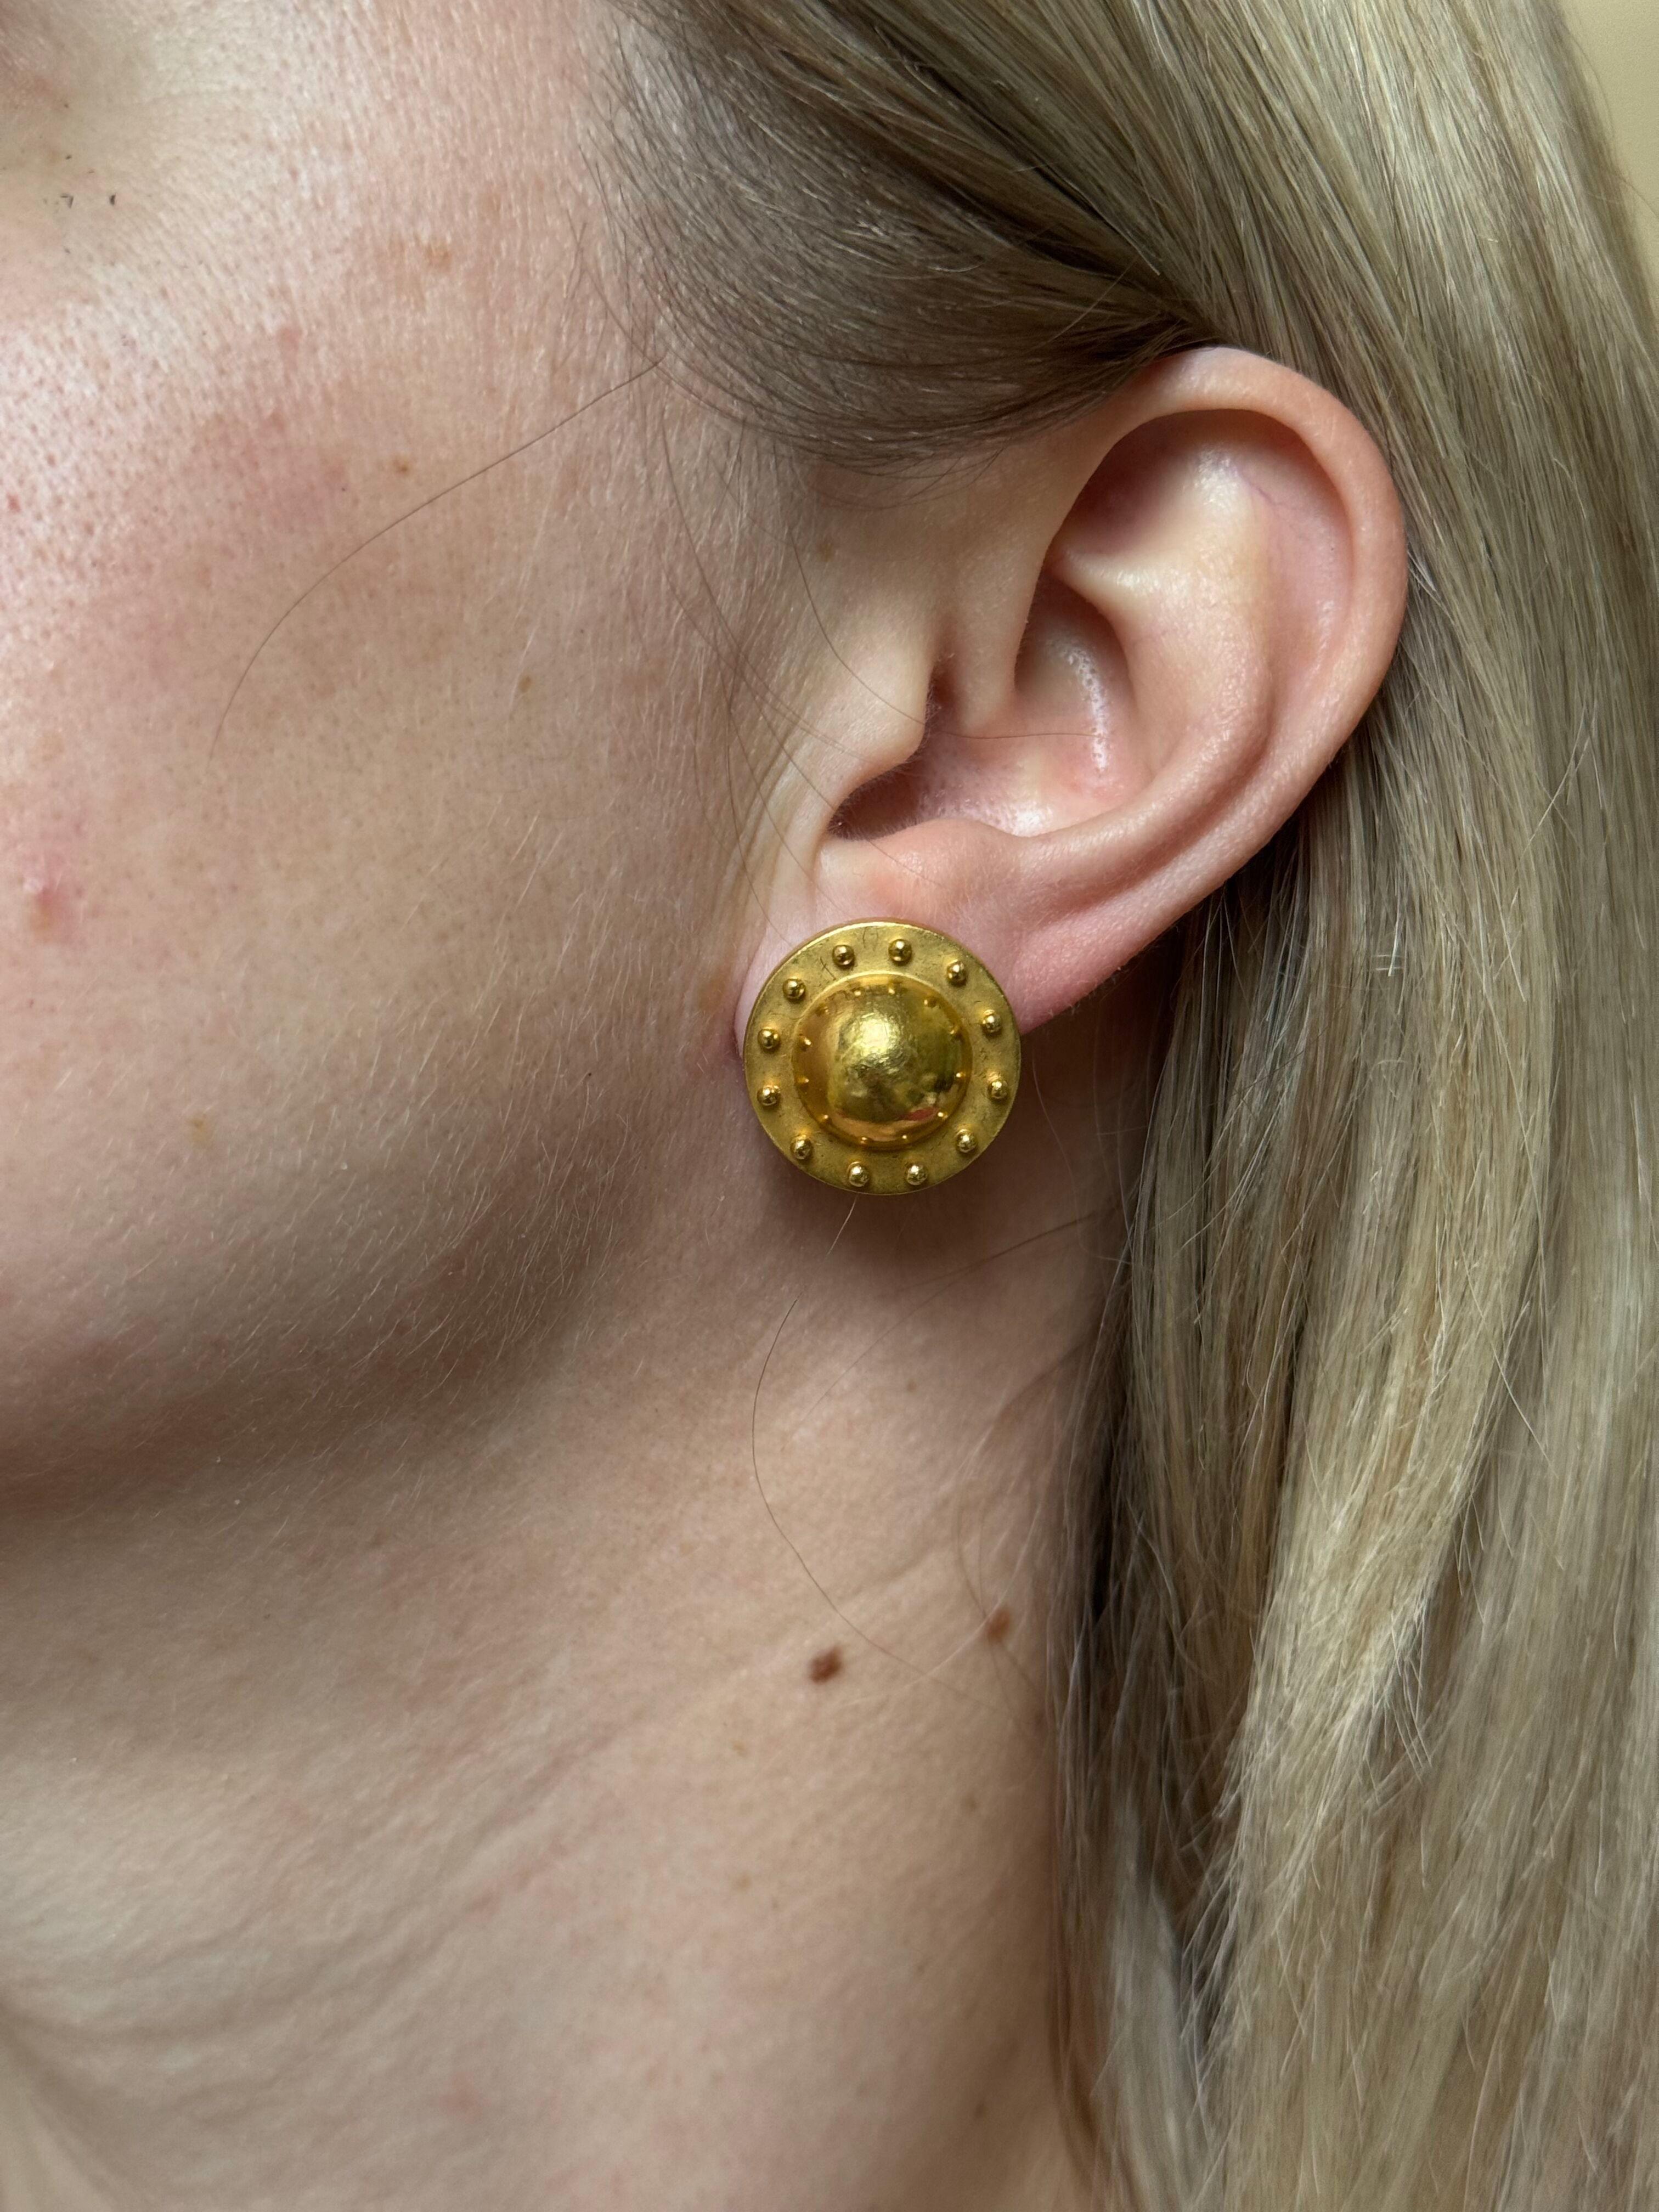 Pair of 22k yellow gold button earrings, featuring Etruscan beading design on the rim. Earrings measure 0.75